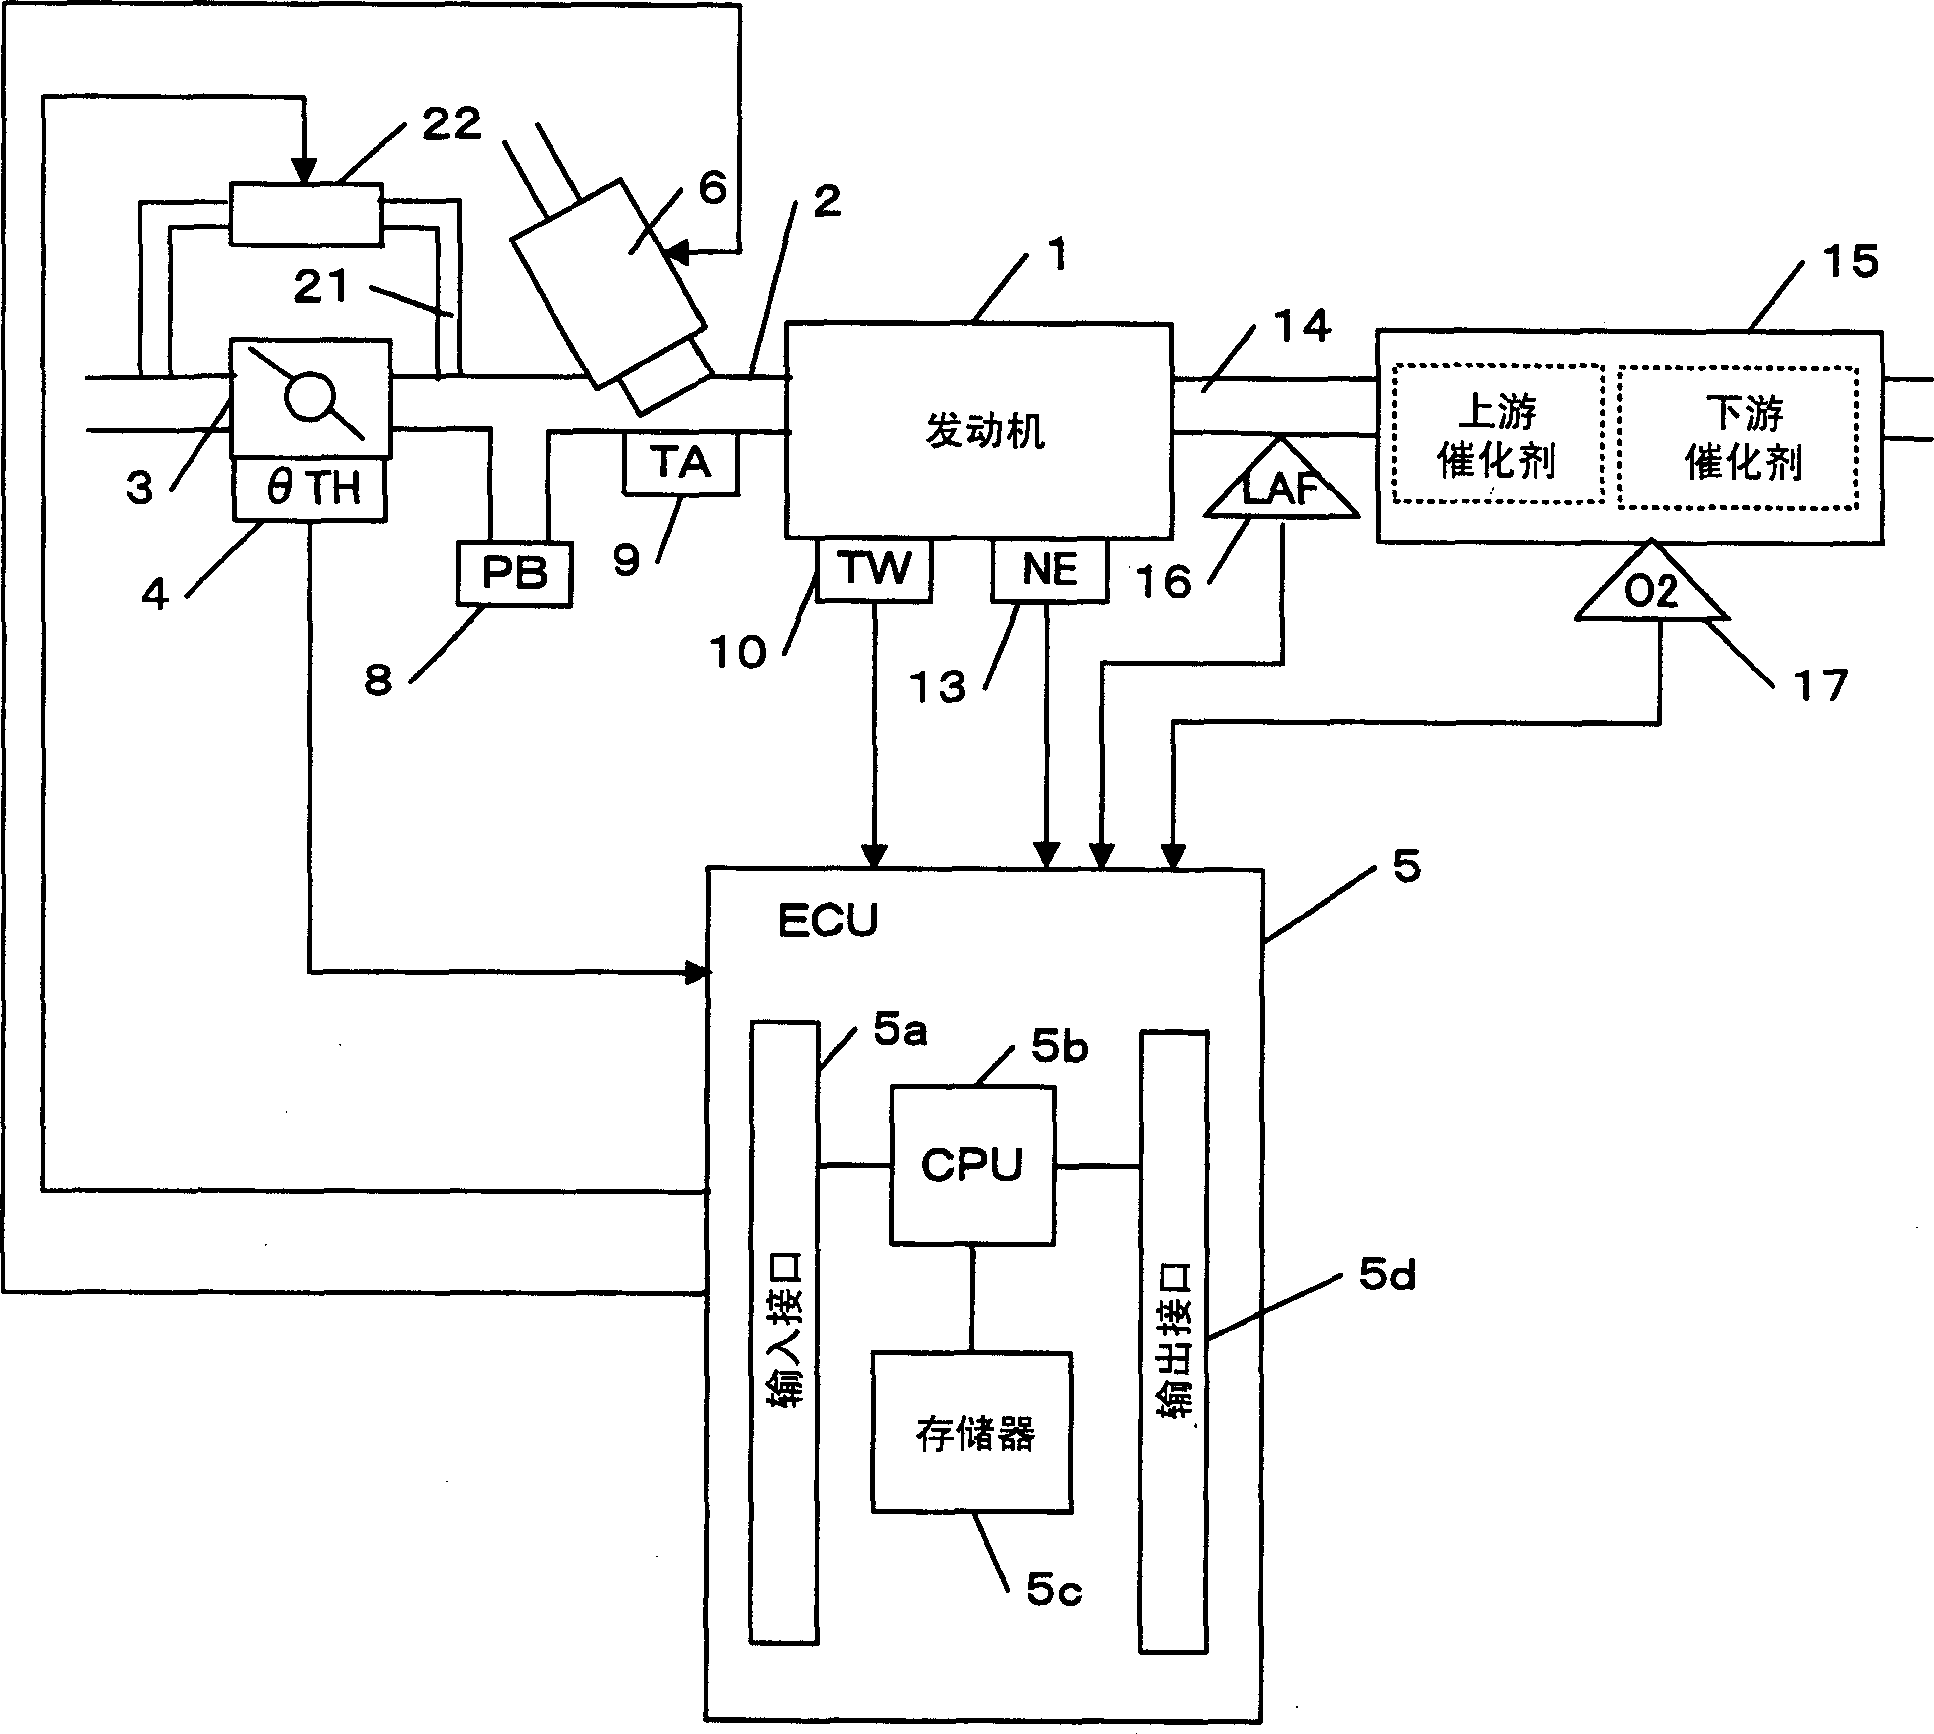 Vehicle controller for controlling air-fuel ratio